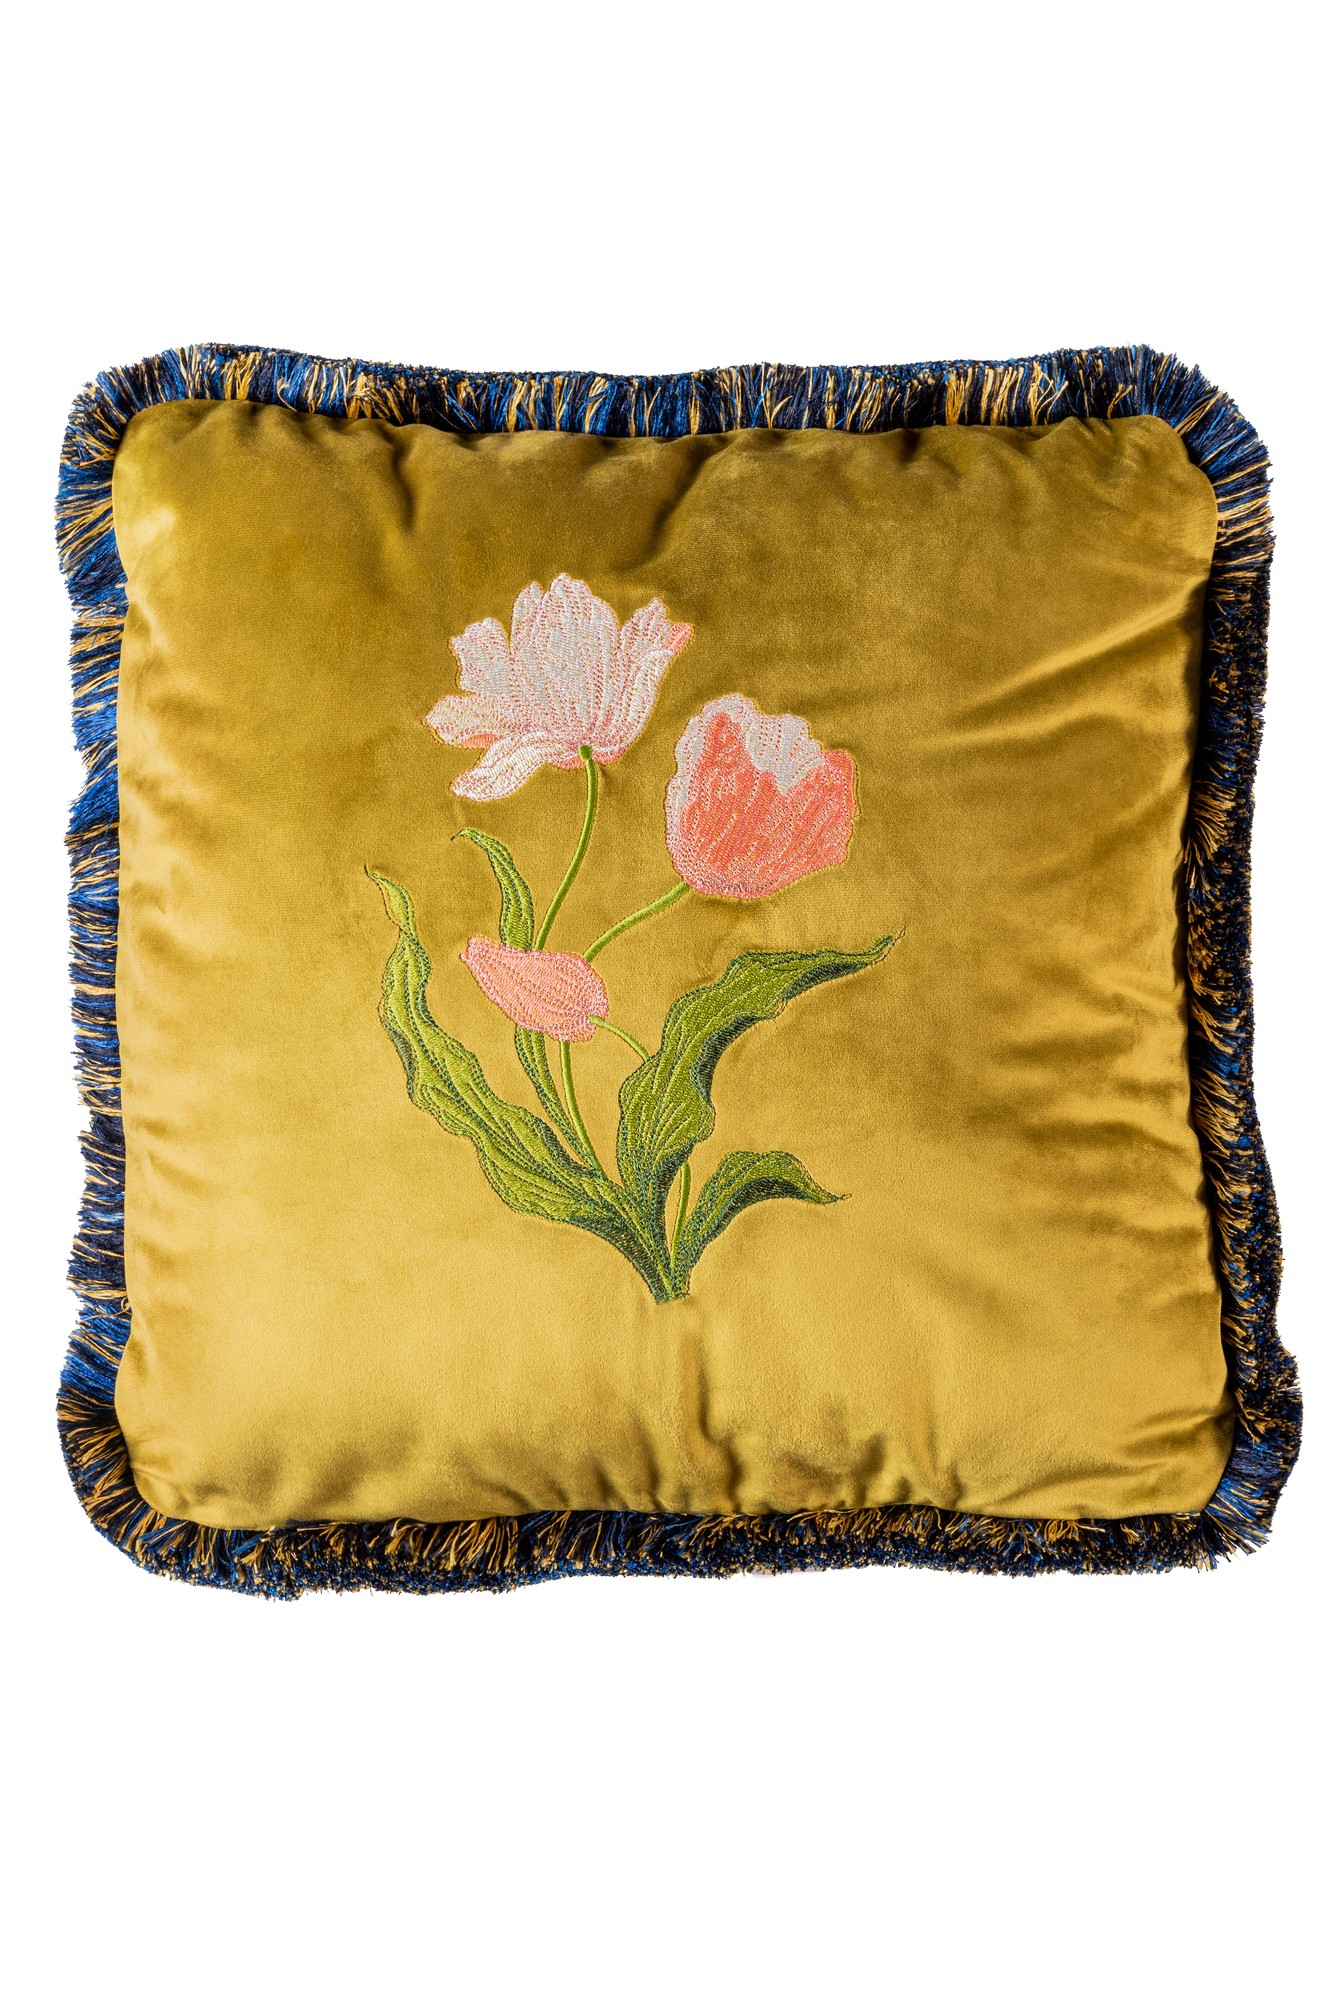 MR Pillow velvet with tulips embroidery